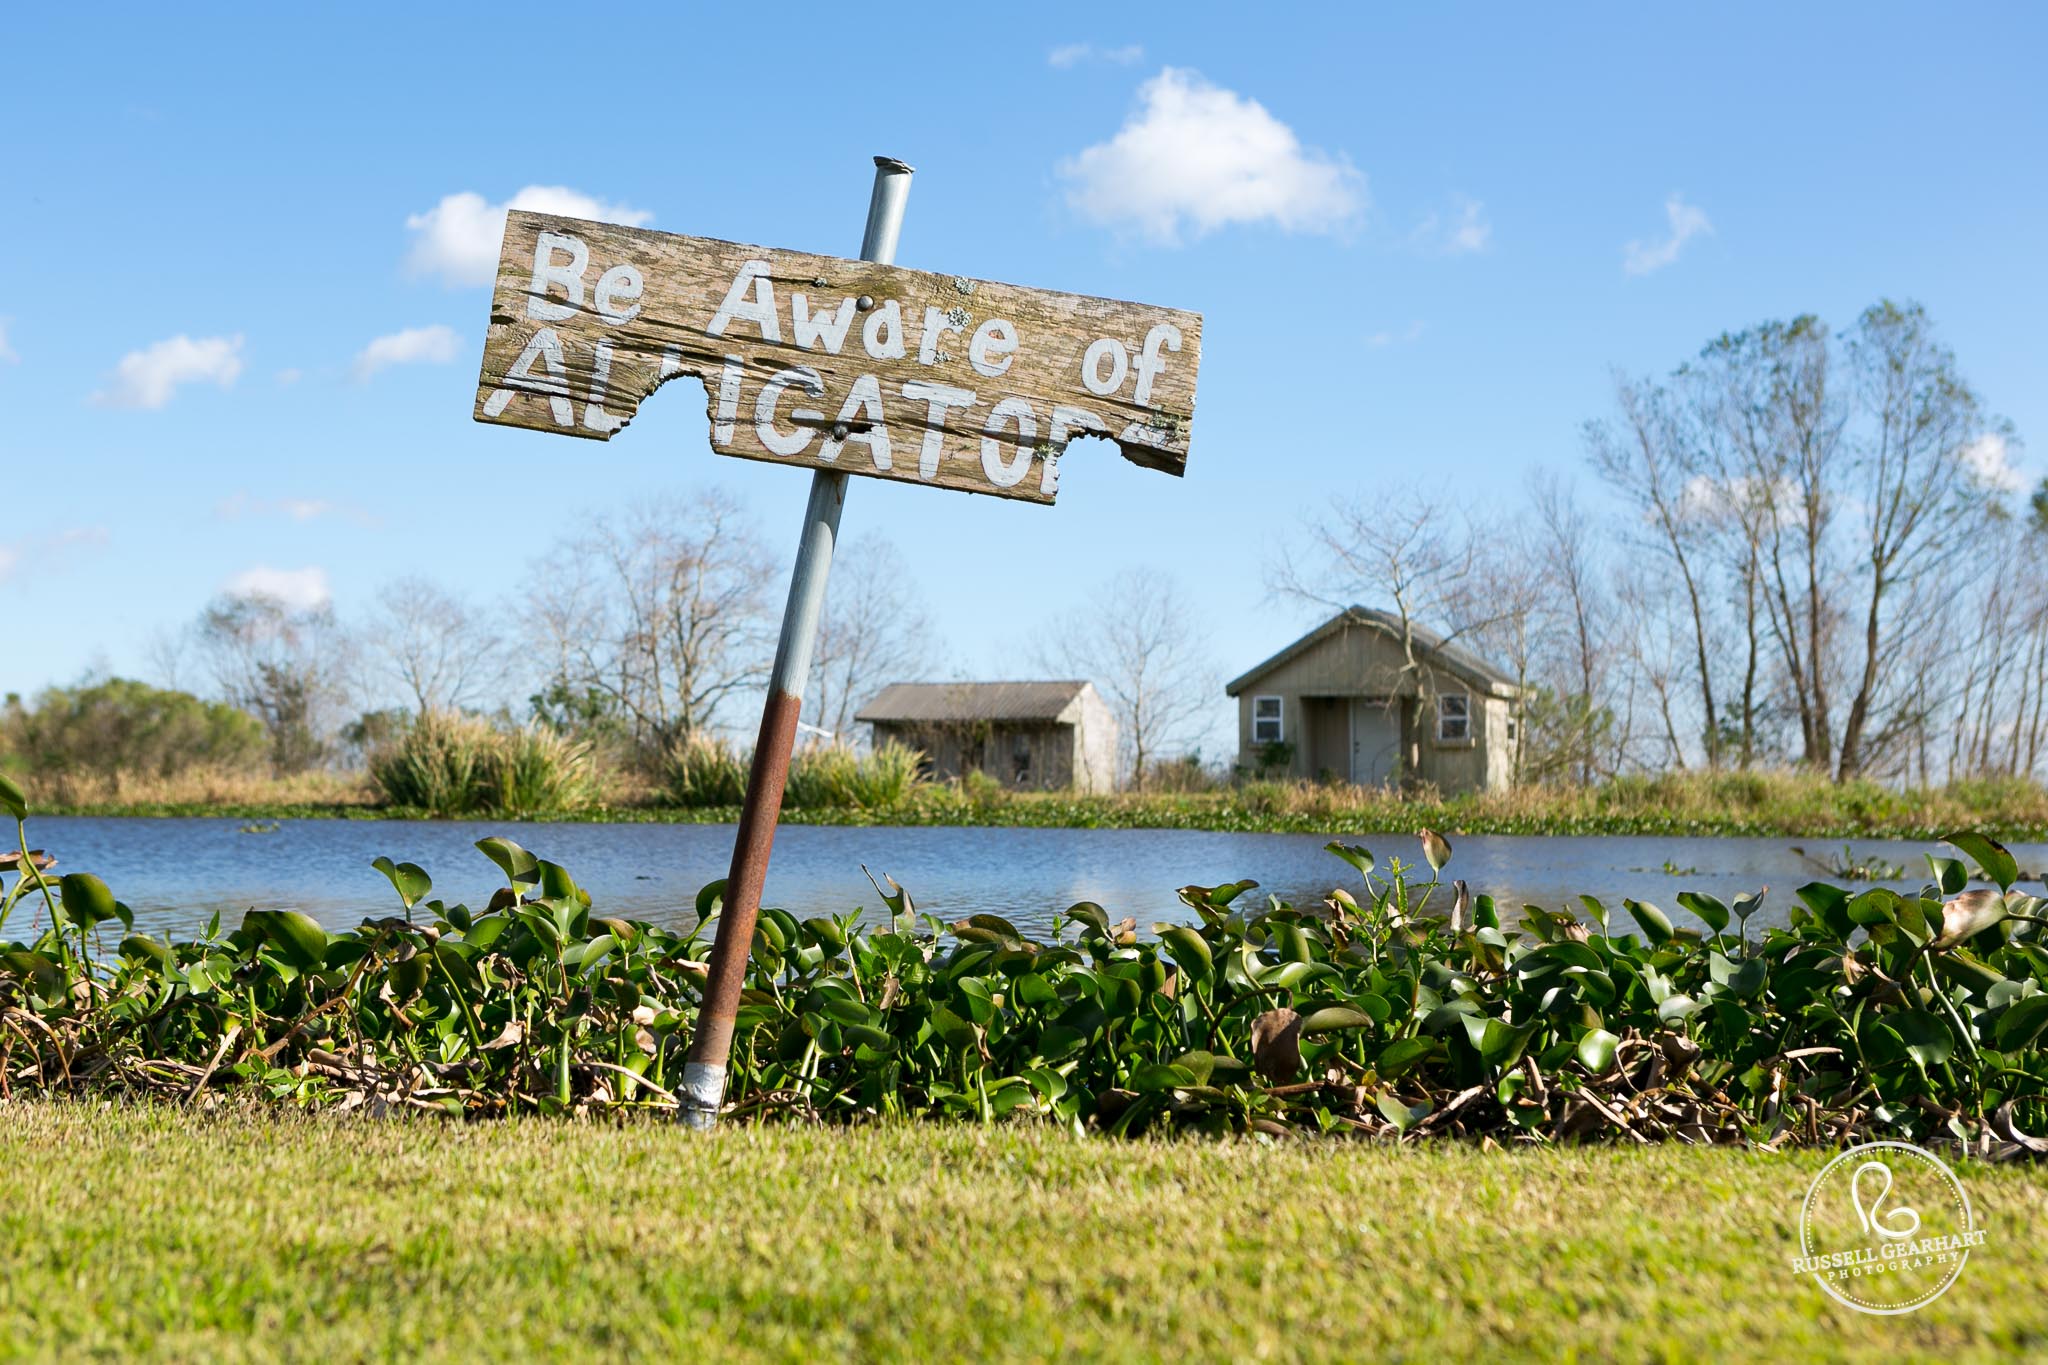 We ventured out of town to see the bayou, swamps, and plantations of the nearby towns